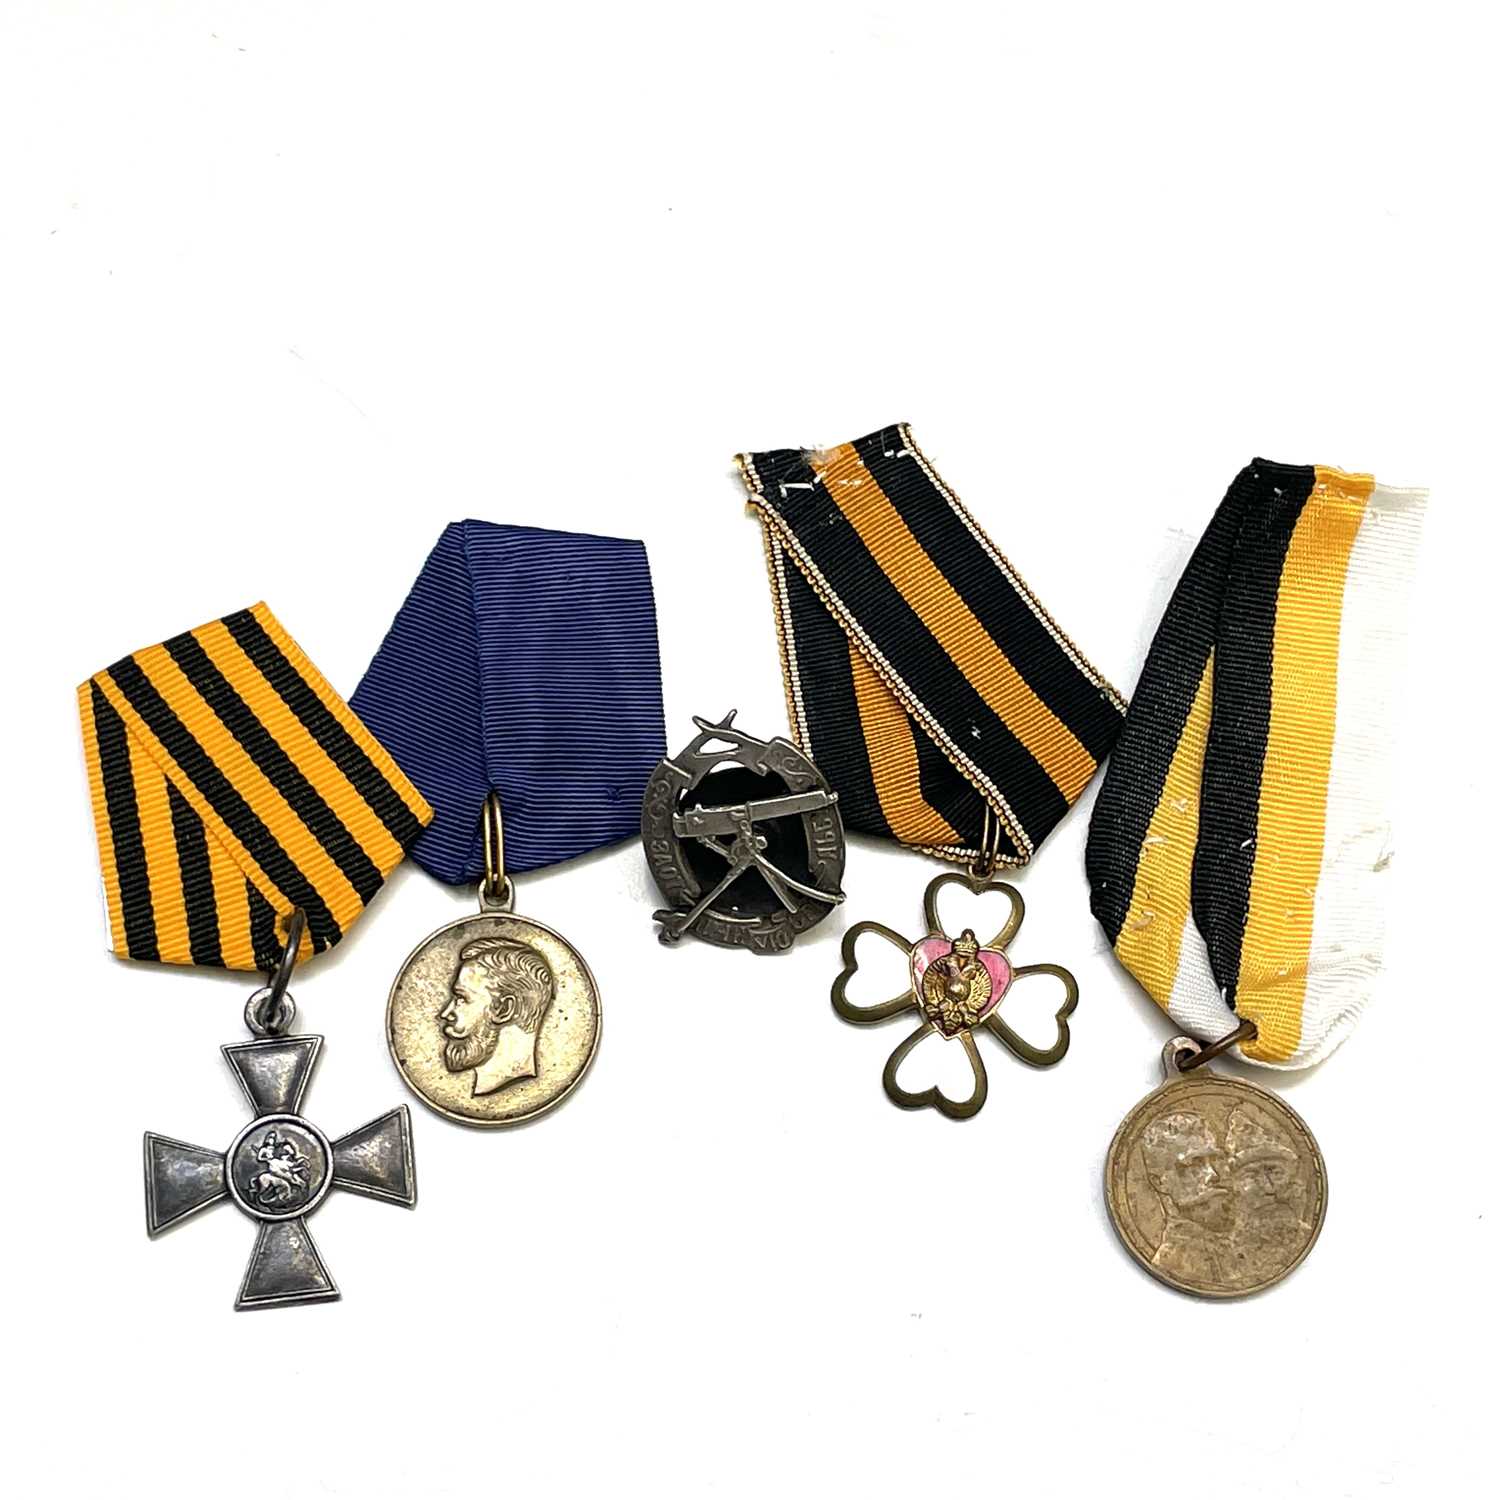 Lot 215 - Imperial Russia WWI Medals - 4 Medals....